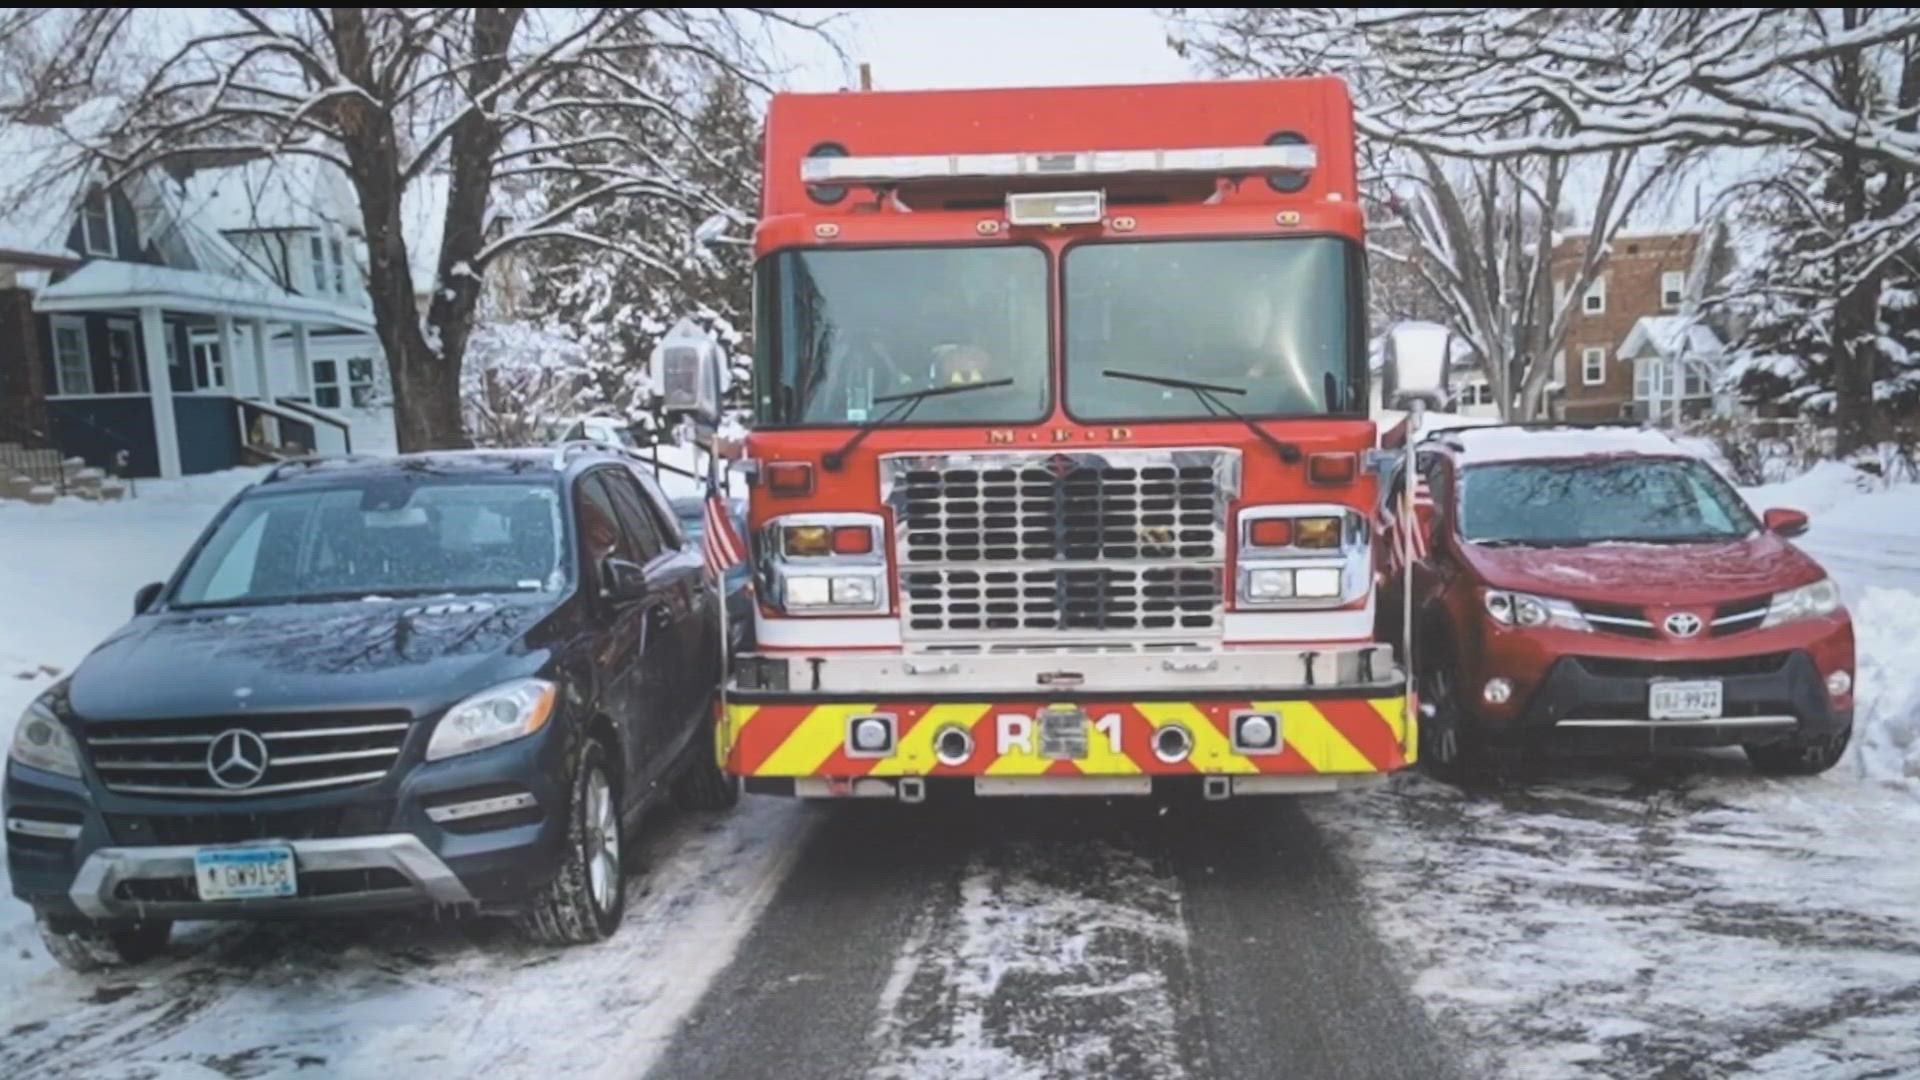 Street parkers in Minneapolis will be changing routines tonight, as the city implements one-side parking rules due to snow-narrowed streets.